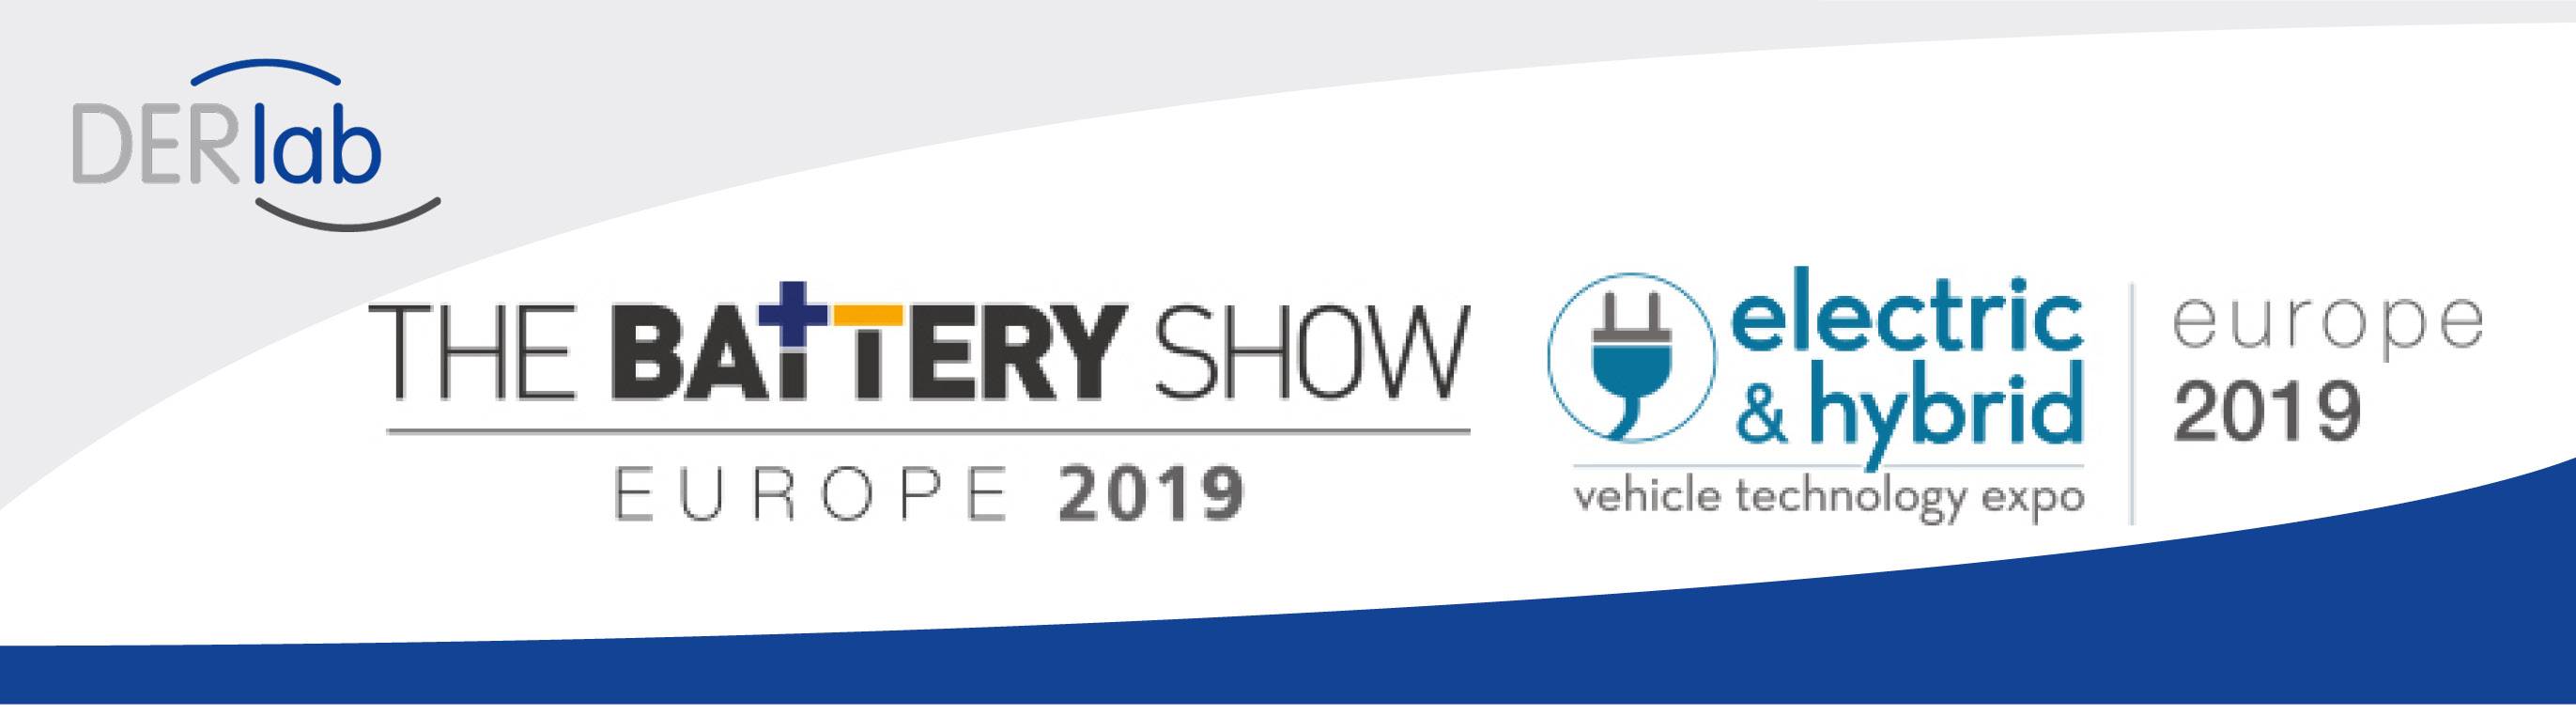 DERlab partners with the Battery Show Europe 2019